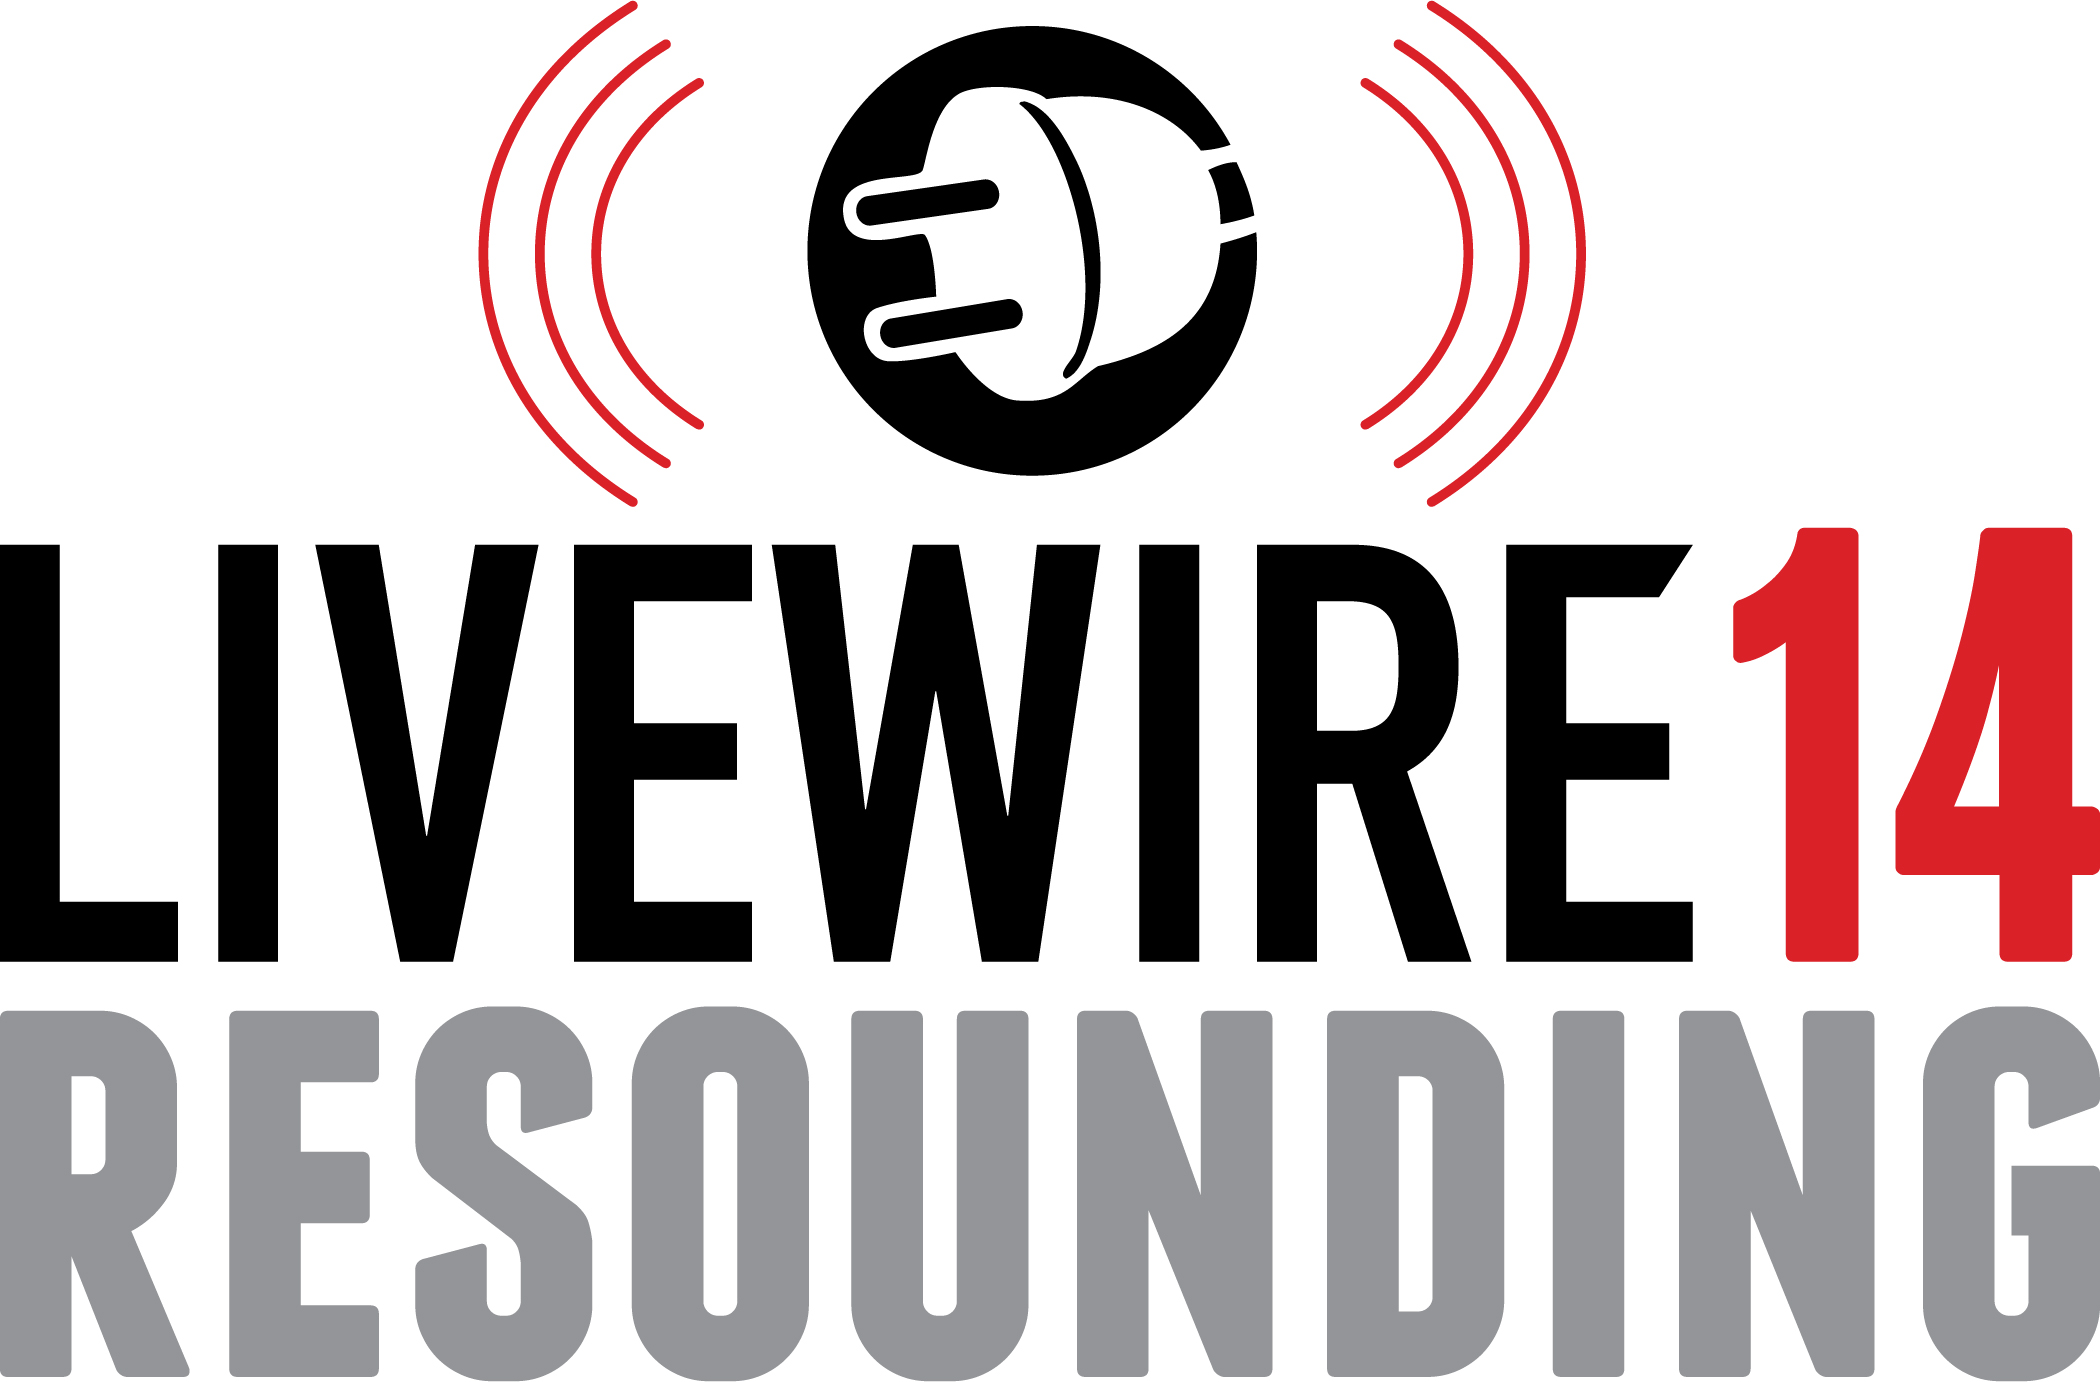 A graphic design says Livewire 14: Resounding